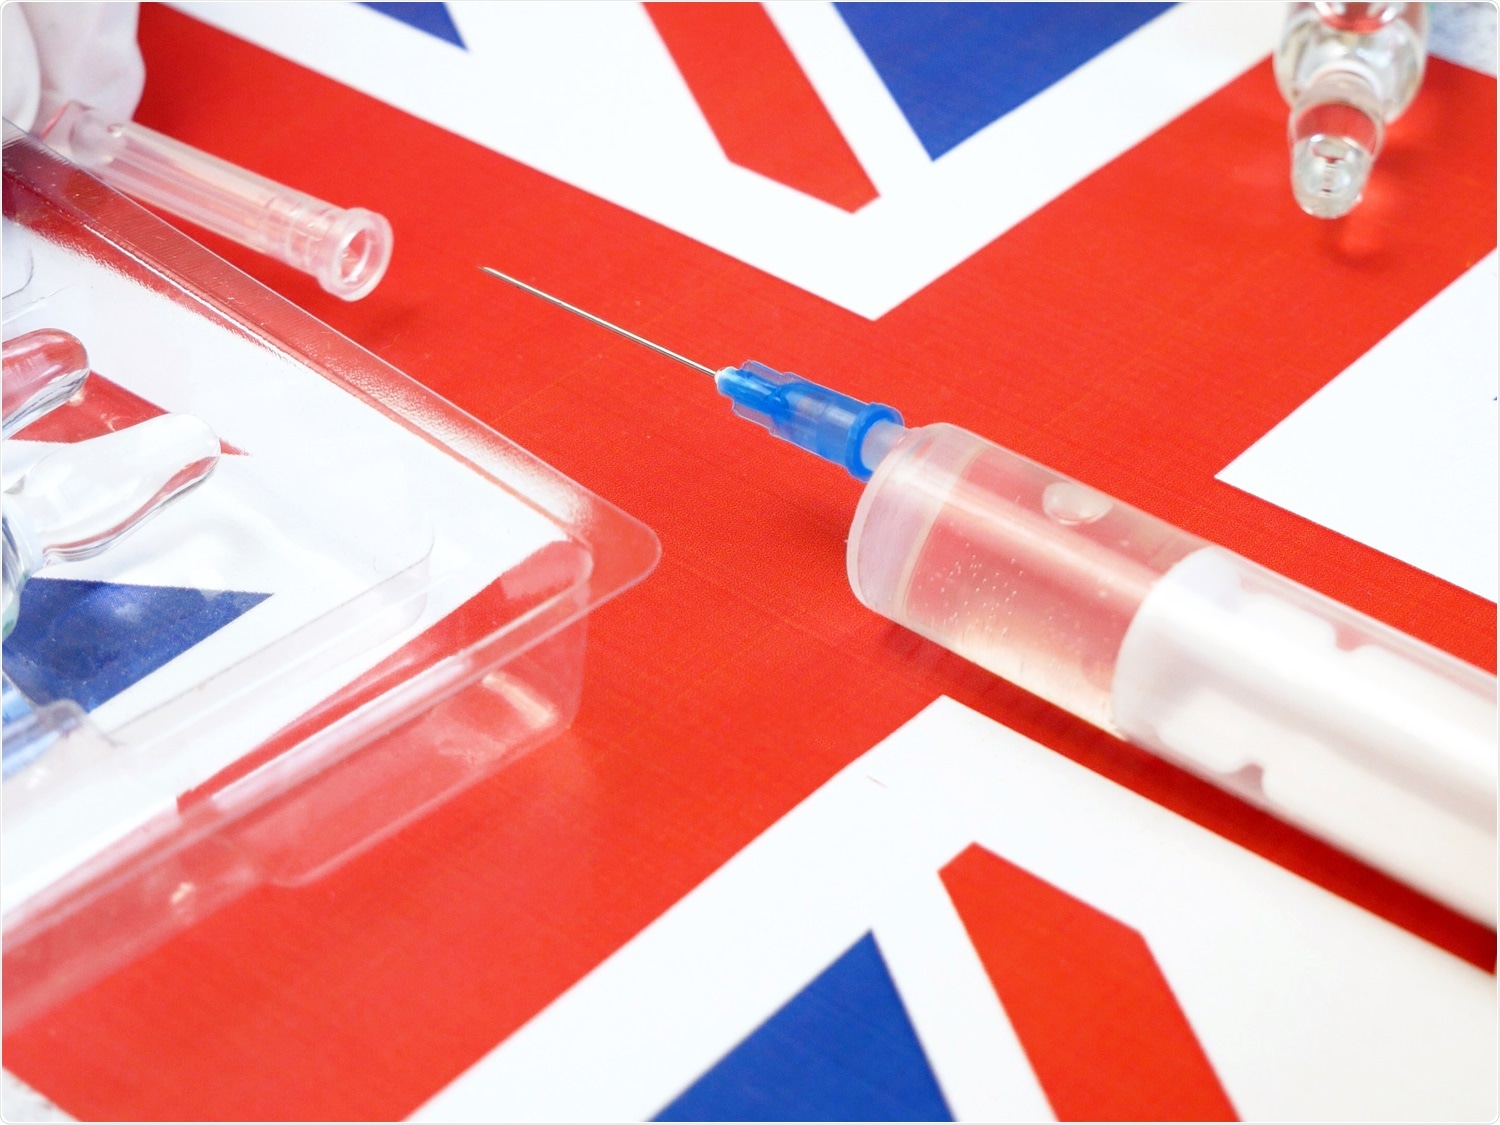 Study: Characteristics associated with COVID-19 vaccine uptake among adults in England (08 December – 17 May 2021). Image Credit: LanKS / Shutterstock